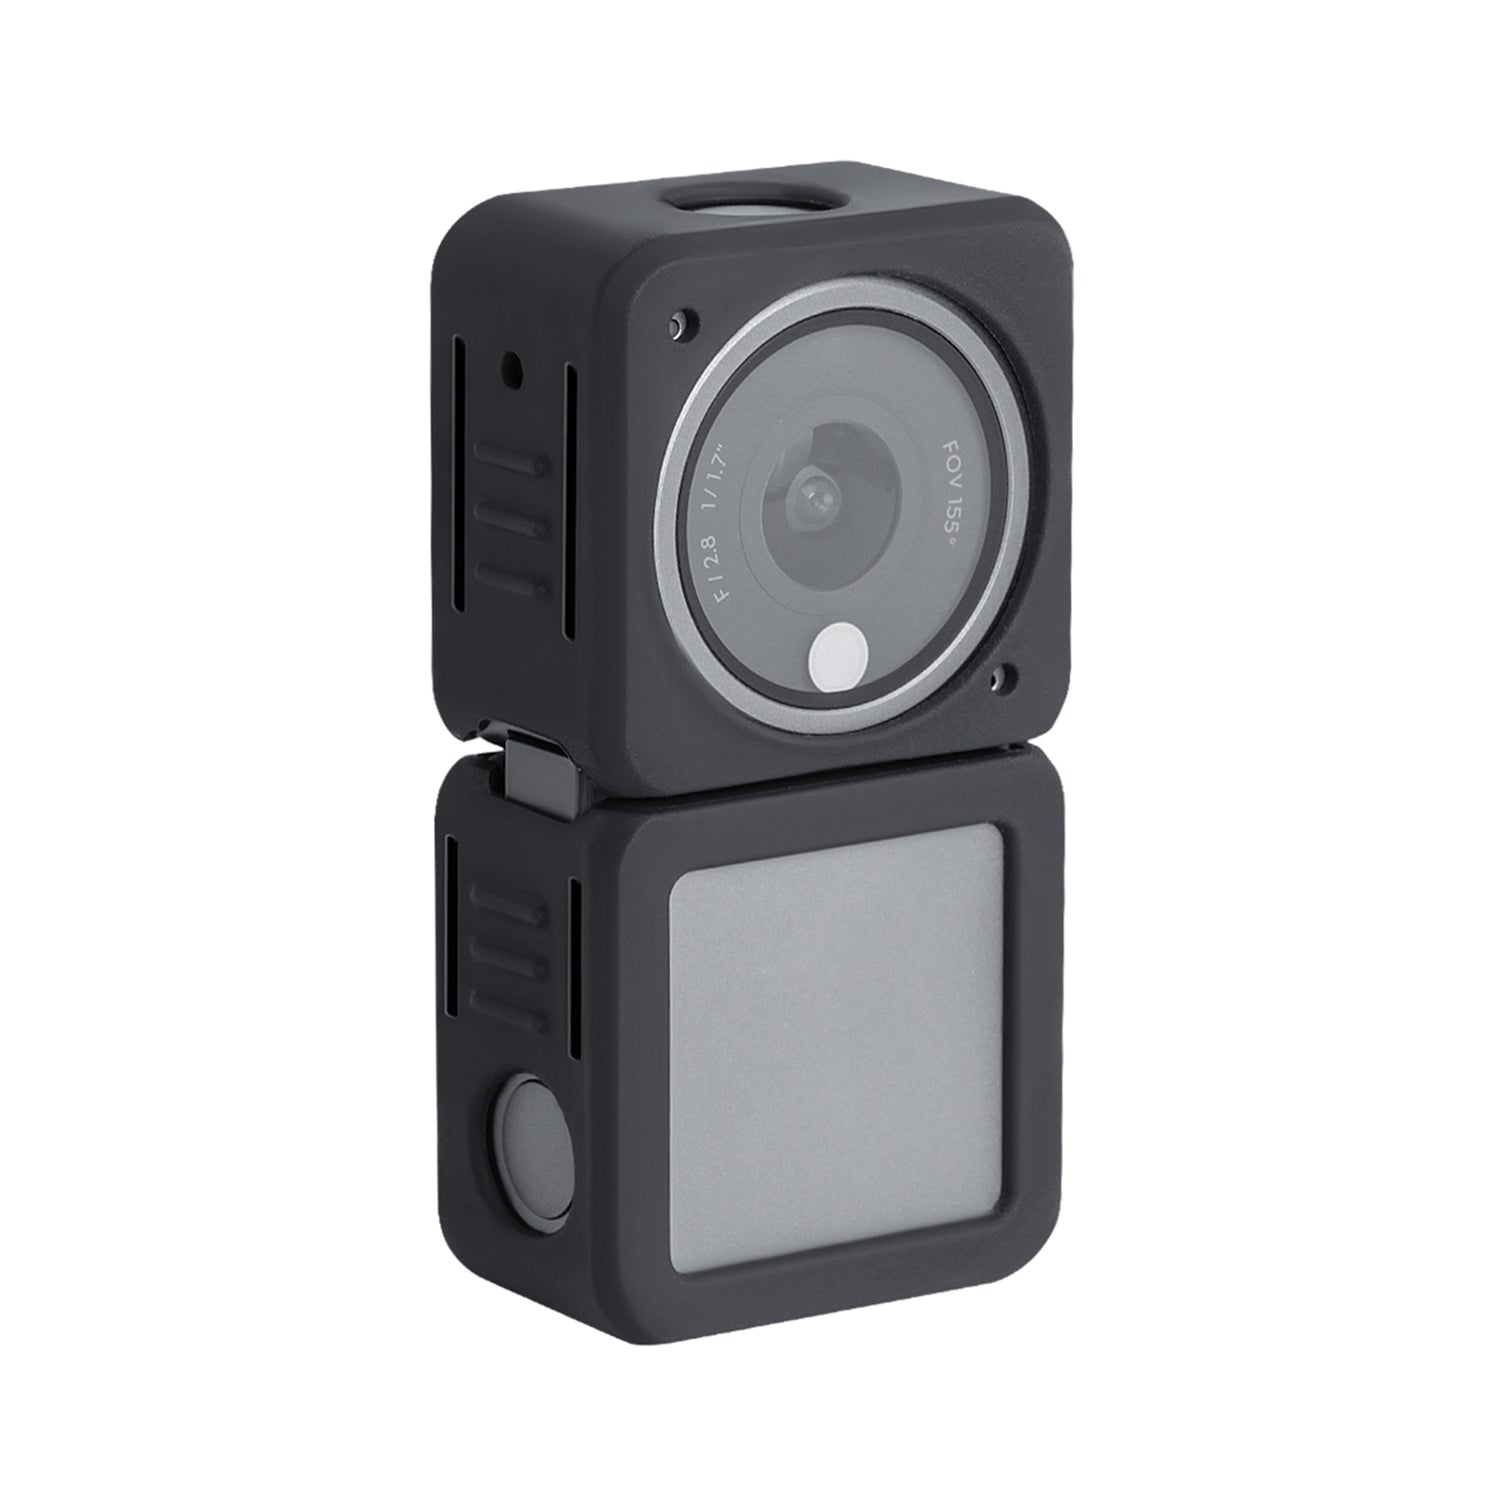 Uniqkart OA2-BHT345 Split-type Sports Camera Silicone Cover Shock-proof Protective Case for DJI Action 2 - Power Version